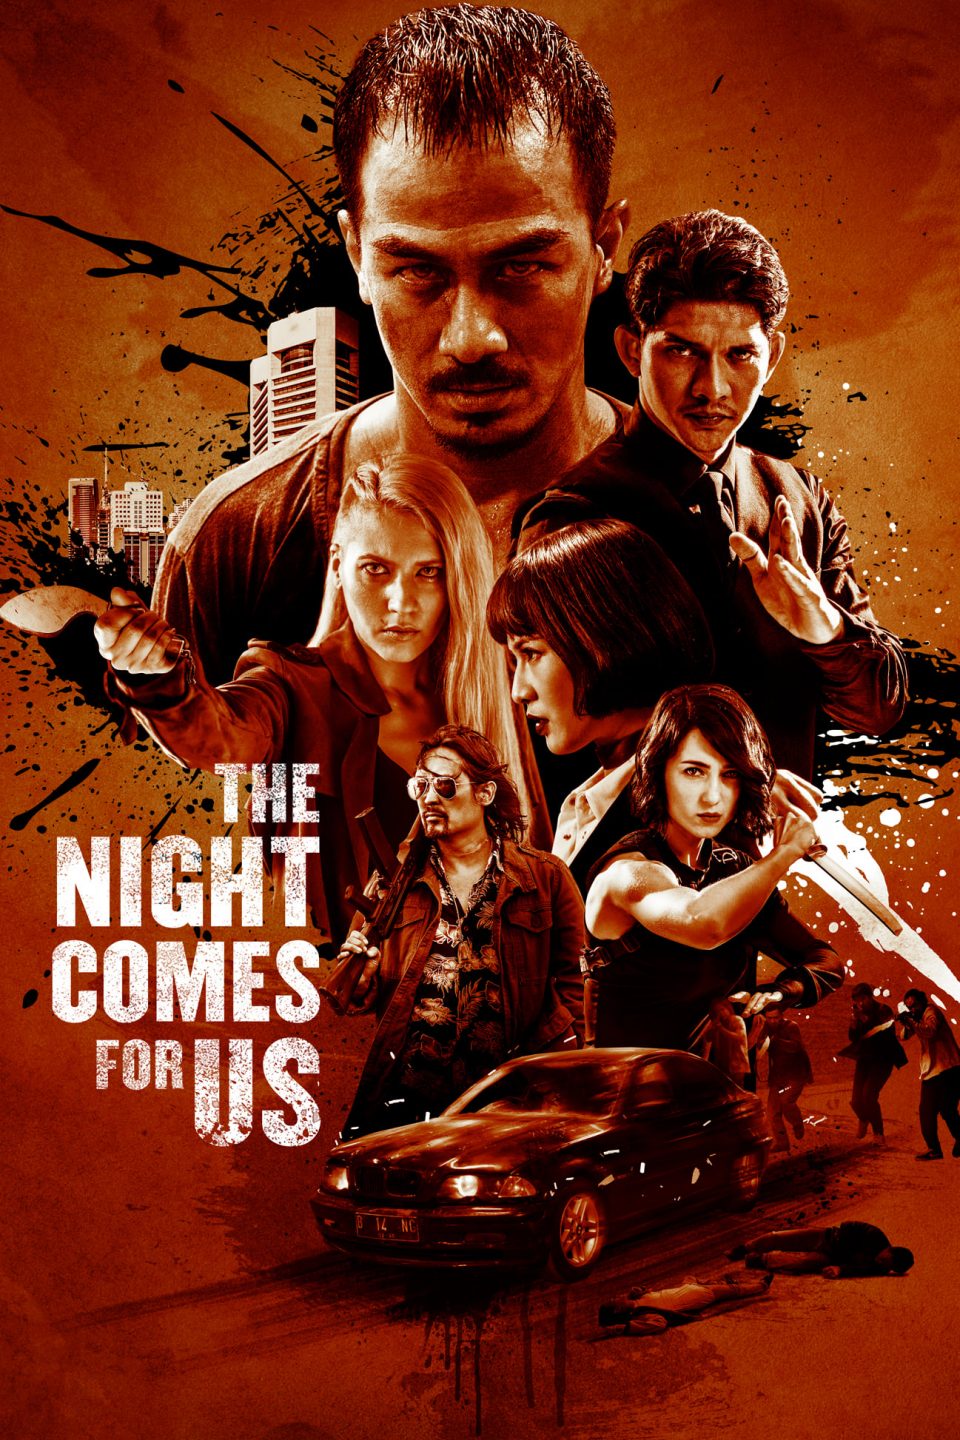 Poster for the movie "The Night Comes for Us"